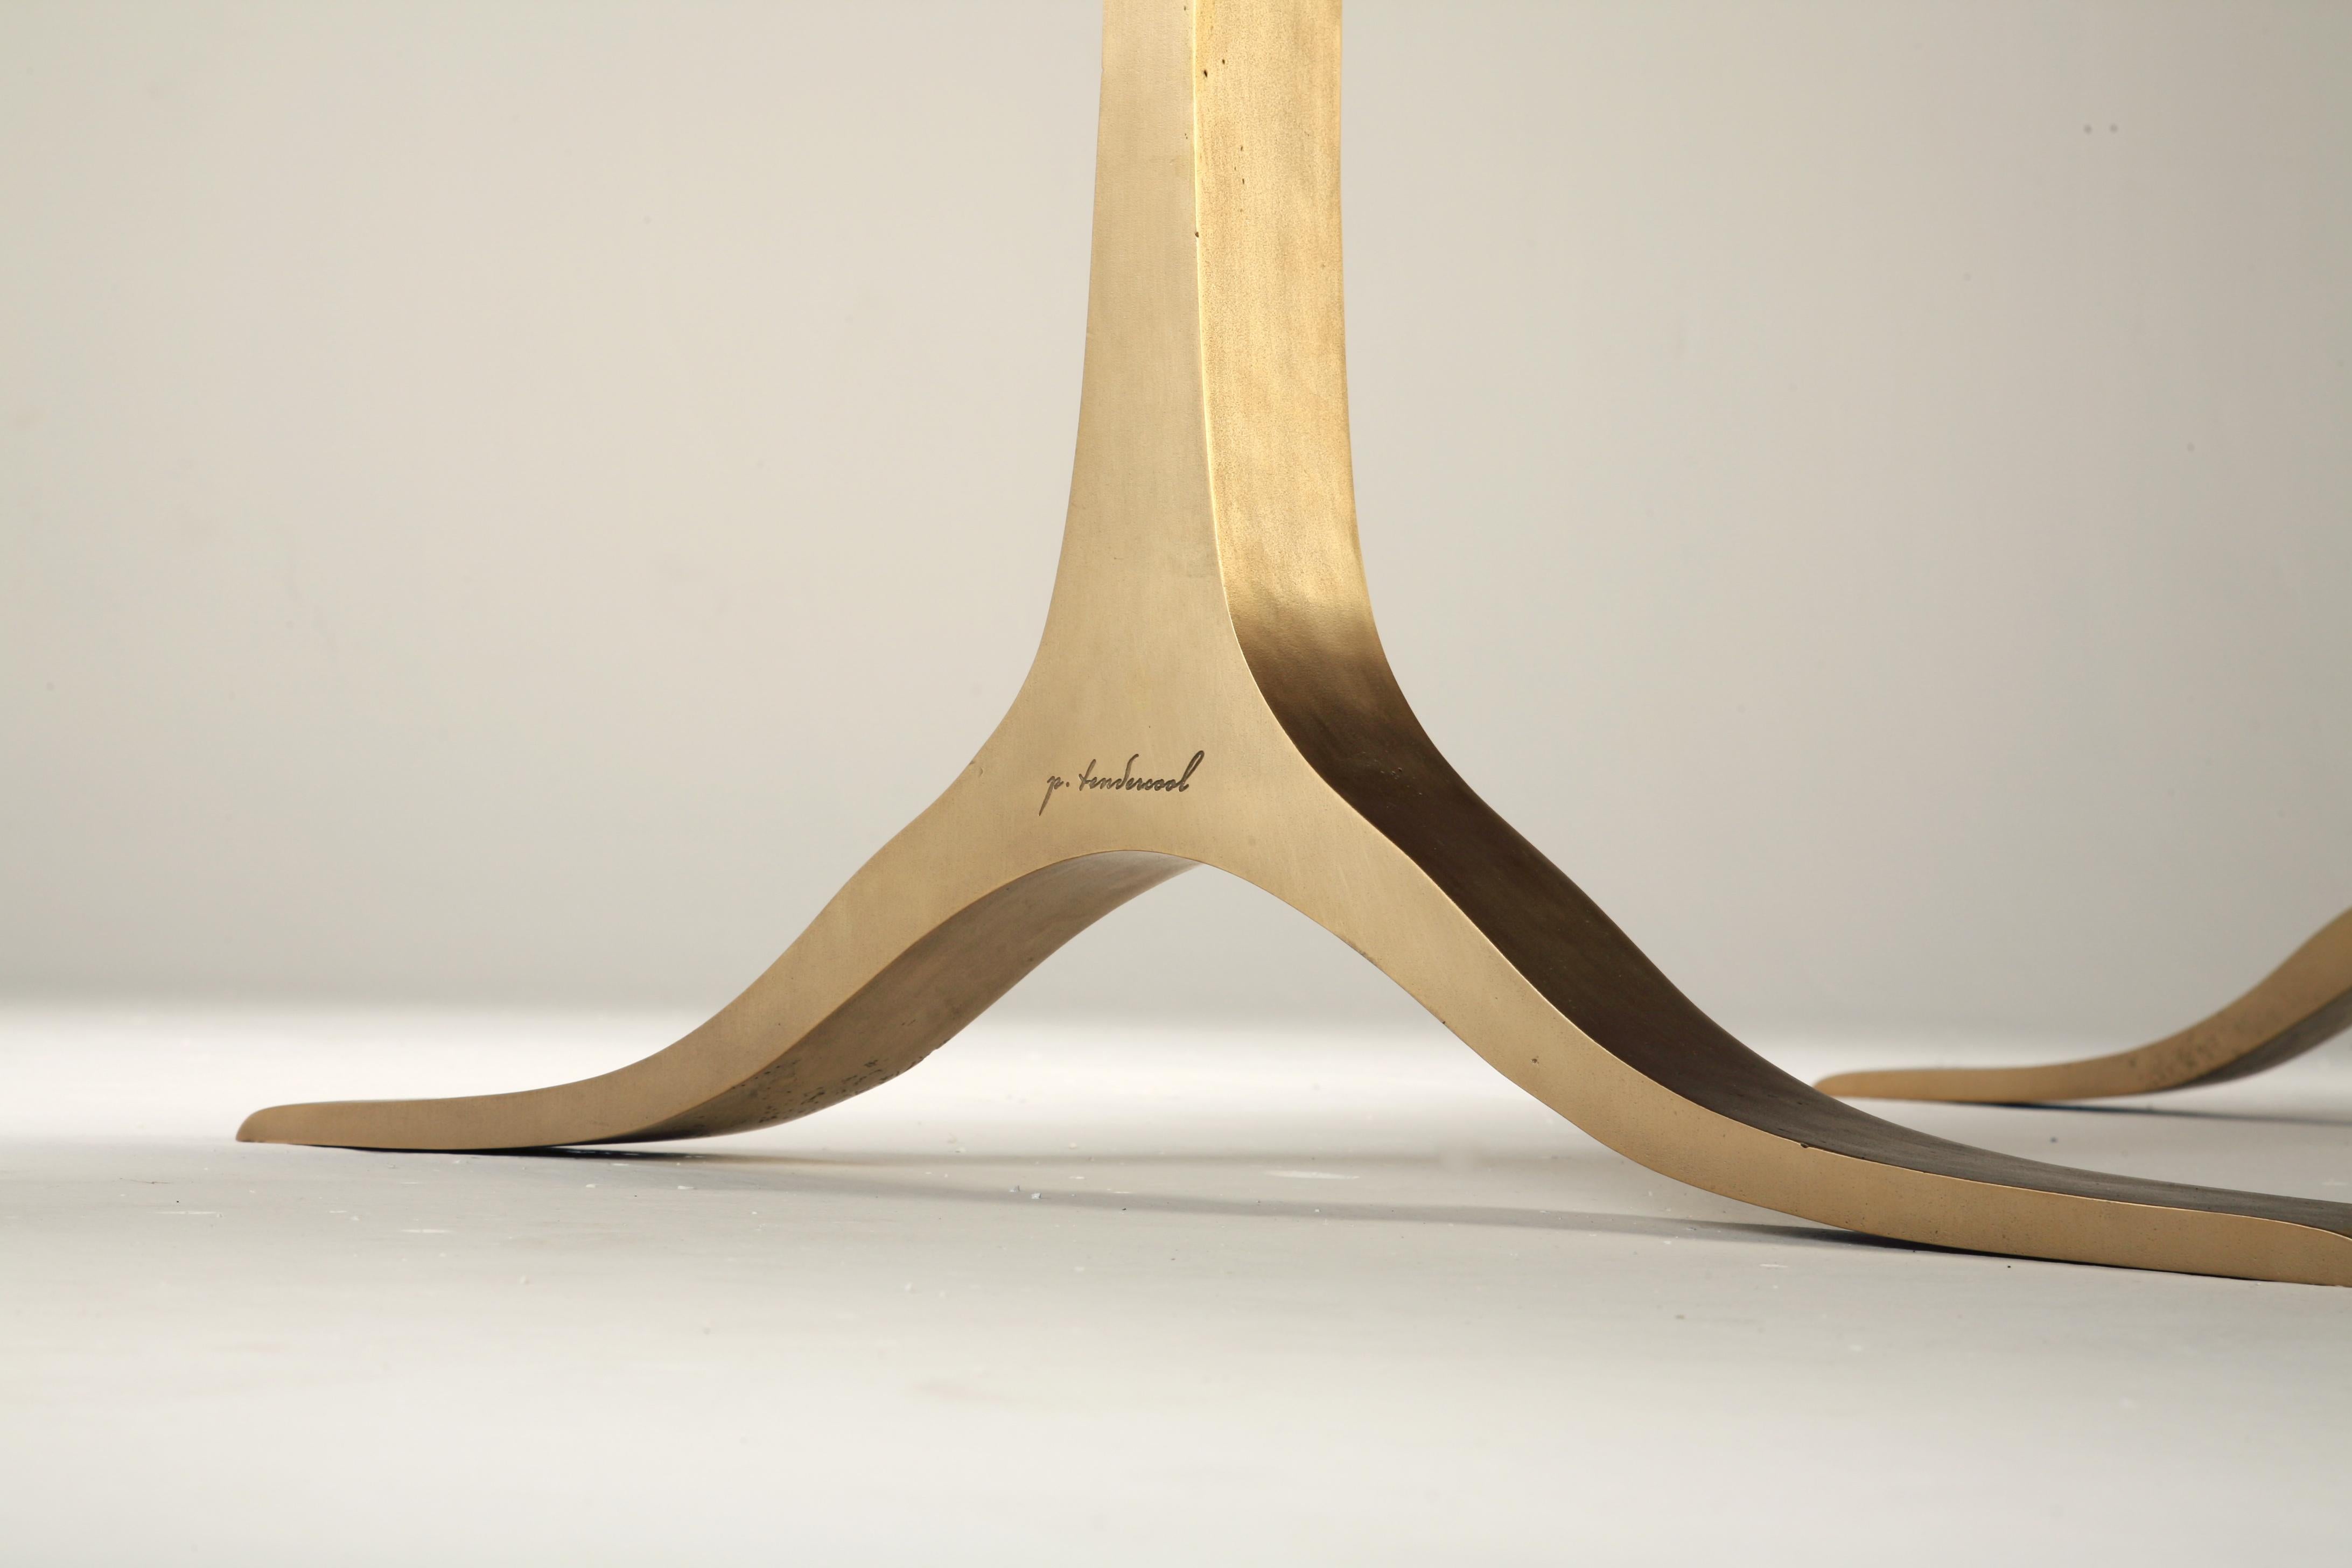 Minimalist Bespoke, Pair of Sand-Cast Brass Polished Bases by P. Tendercool For Sale